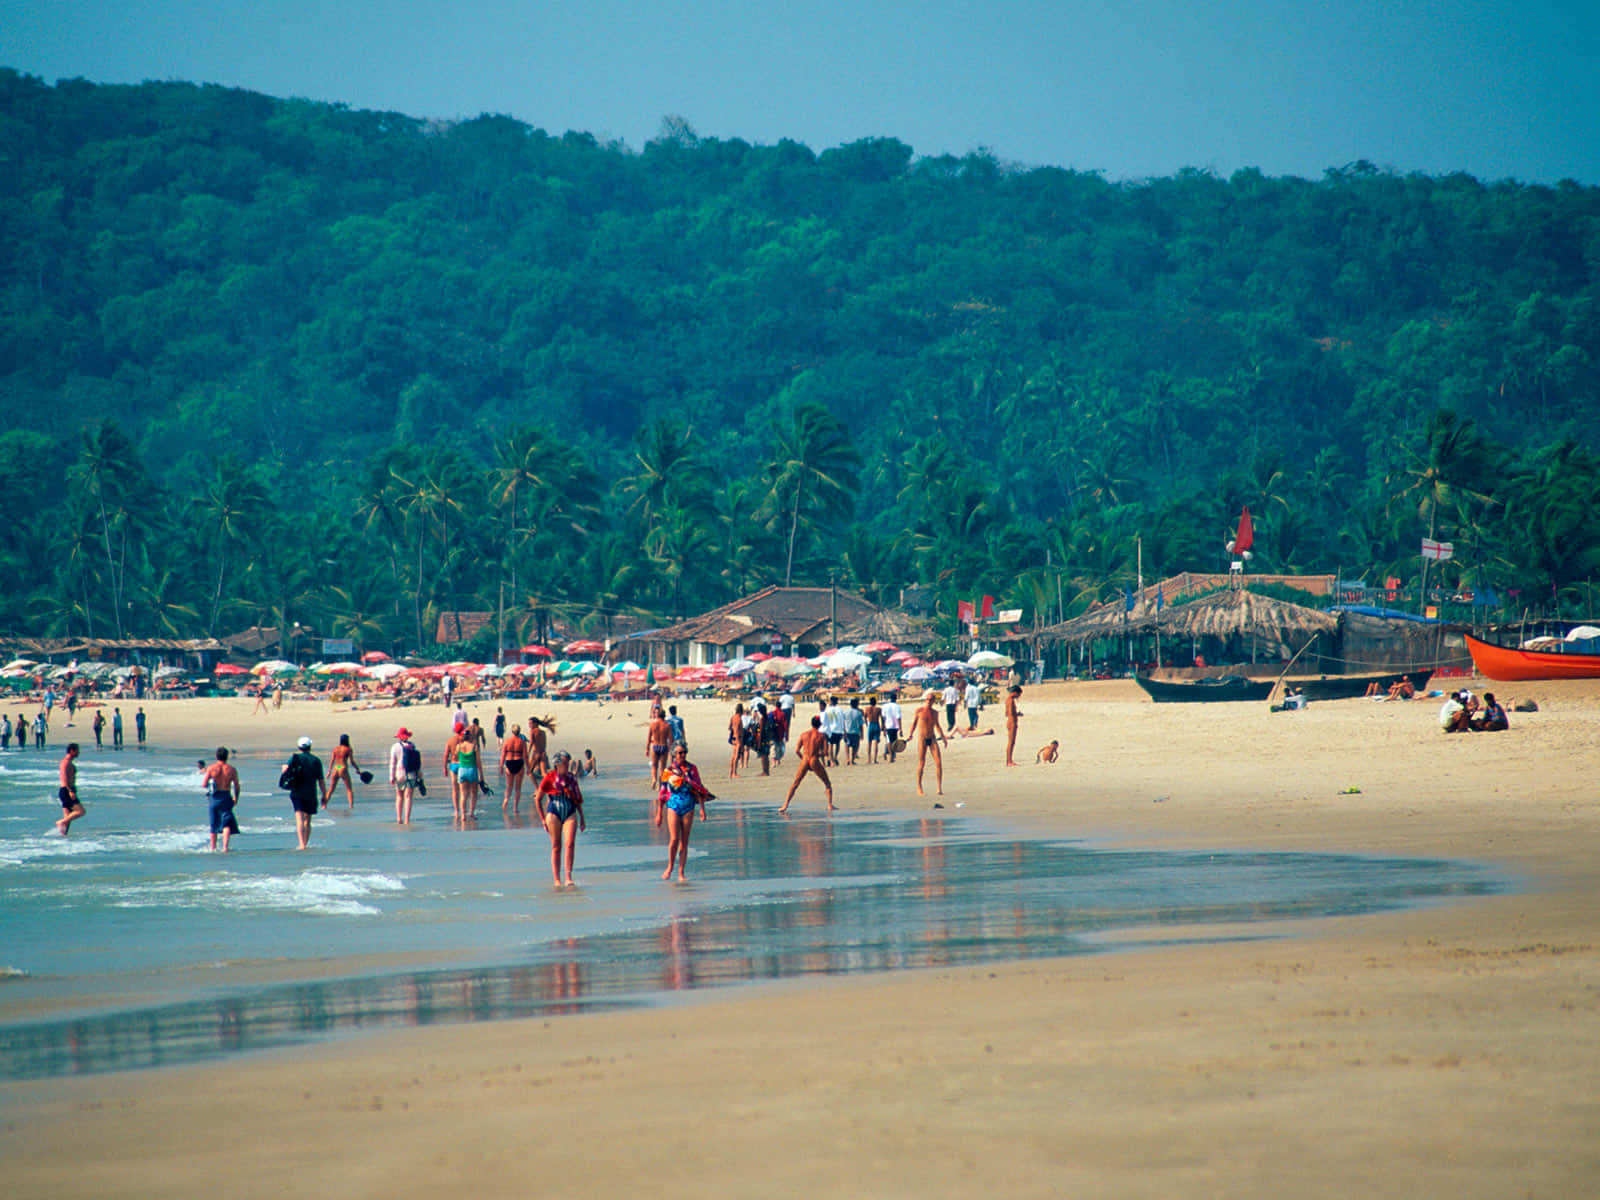 Enjoy the sun and the sea at one of India's most spectacular beaches - Goa beach